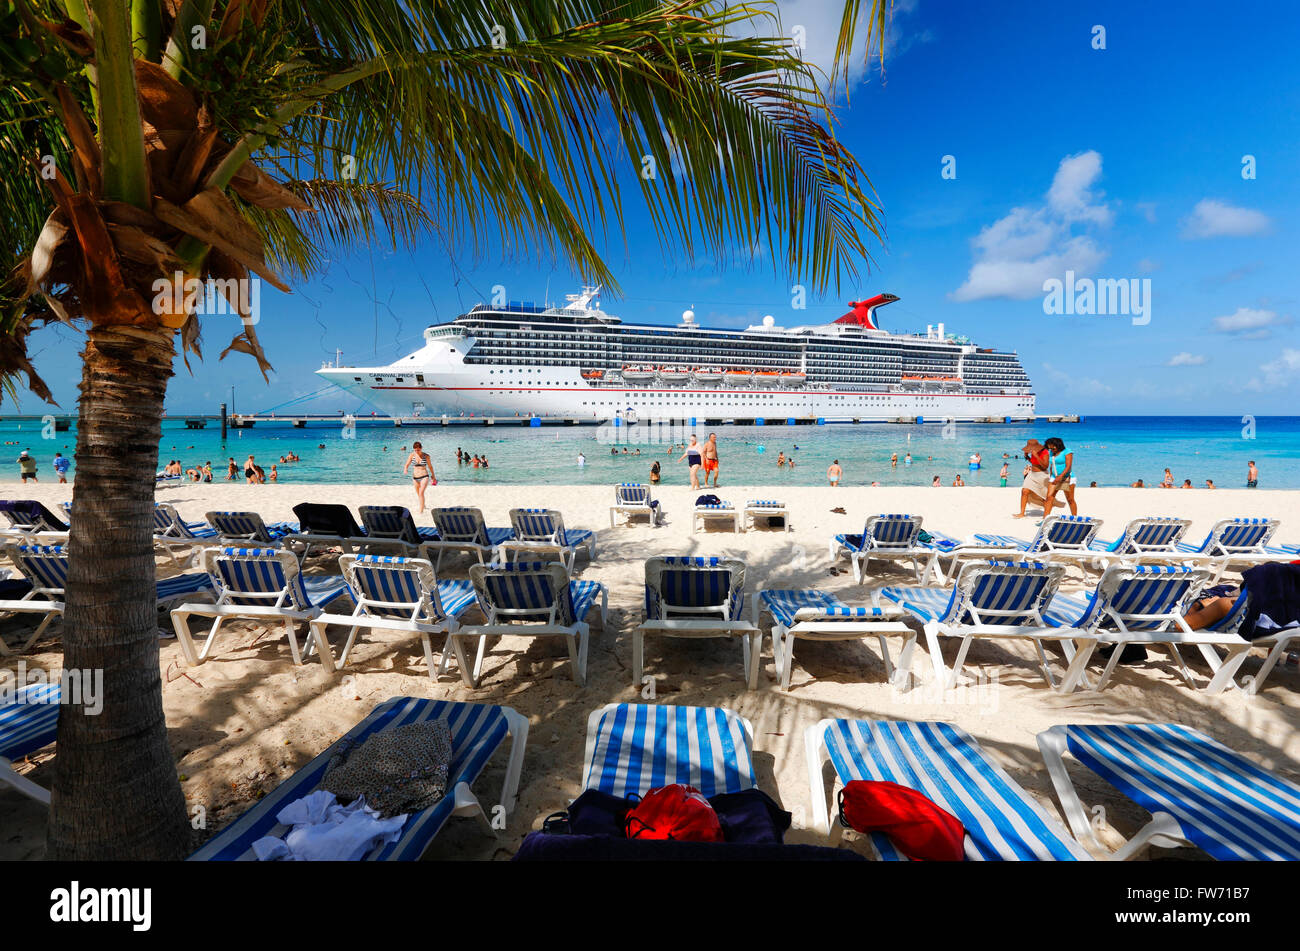 Beach and cruise line ship in Grand Turk, Turks and Caicos Islands Stock Photo